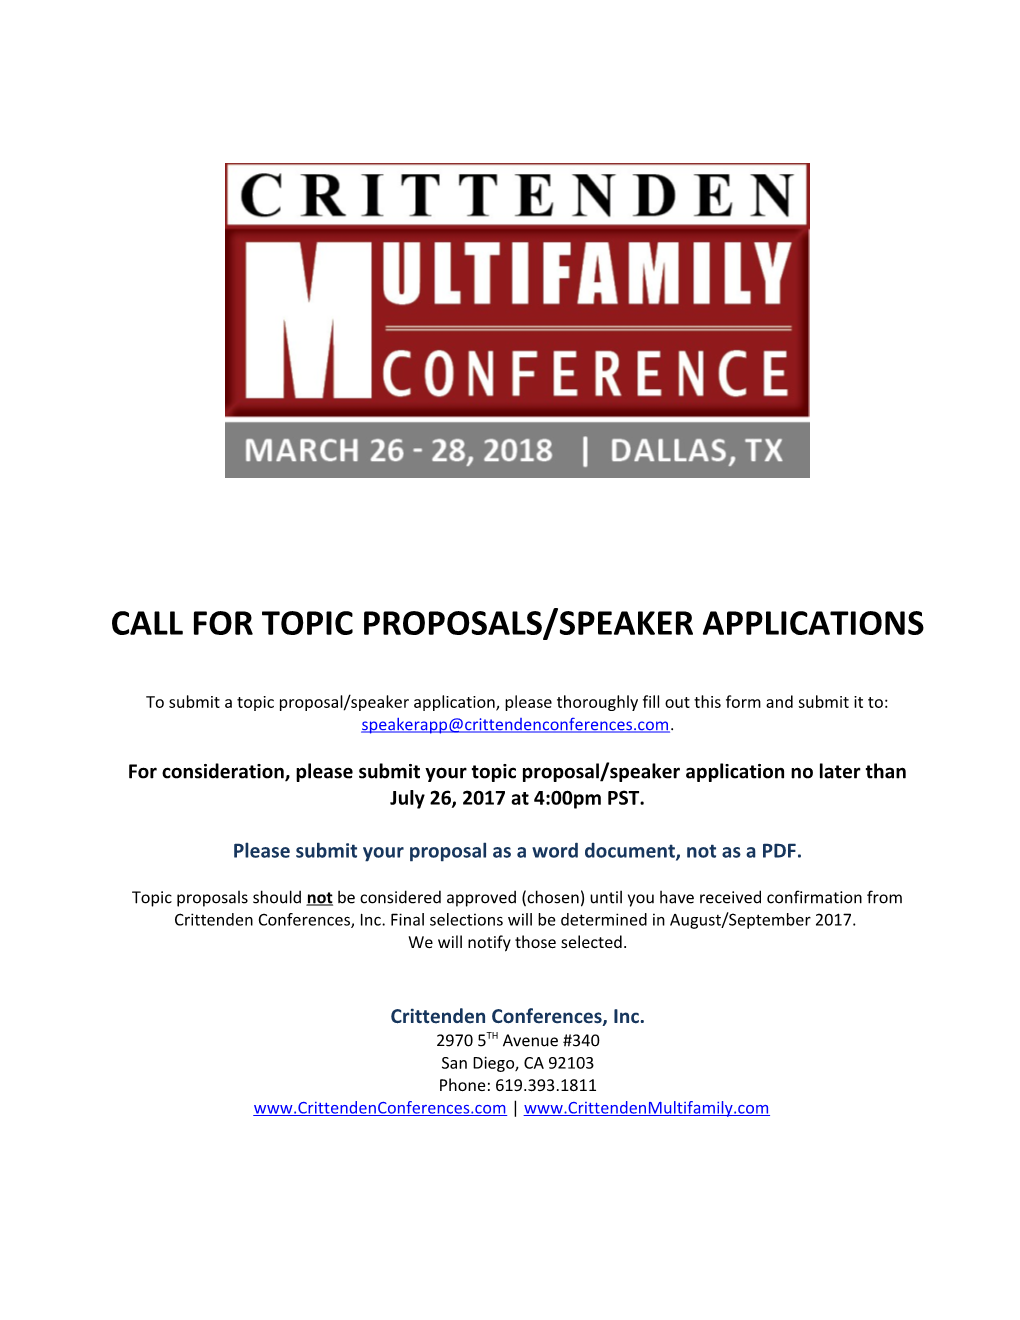 Call for Topic Proposals/Speaker Applications